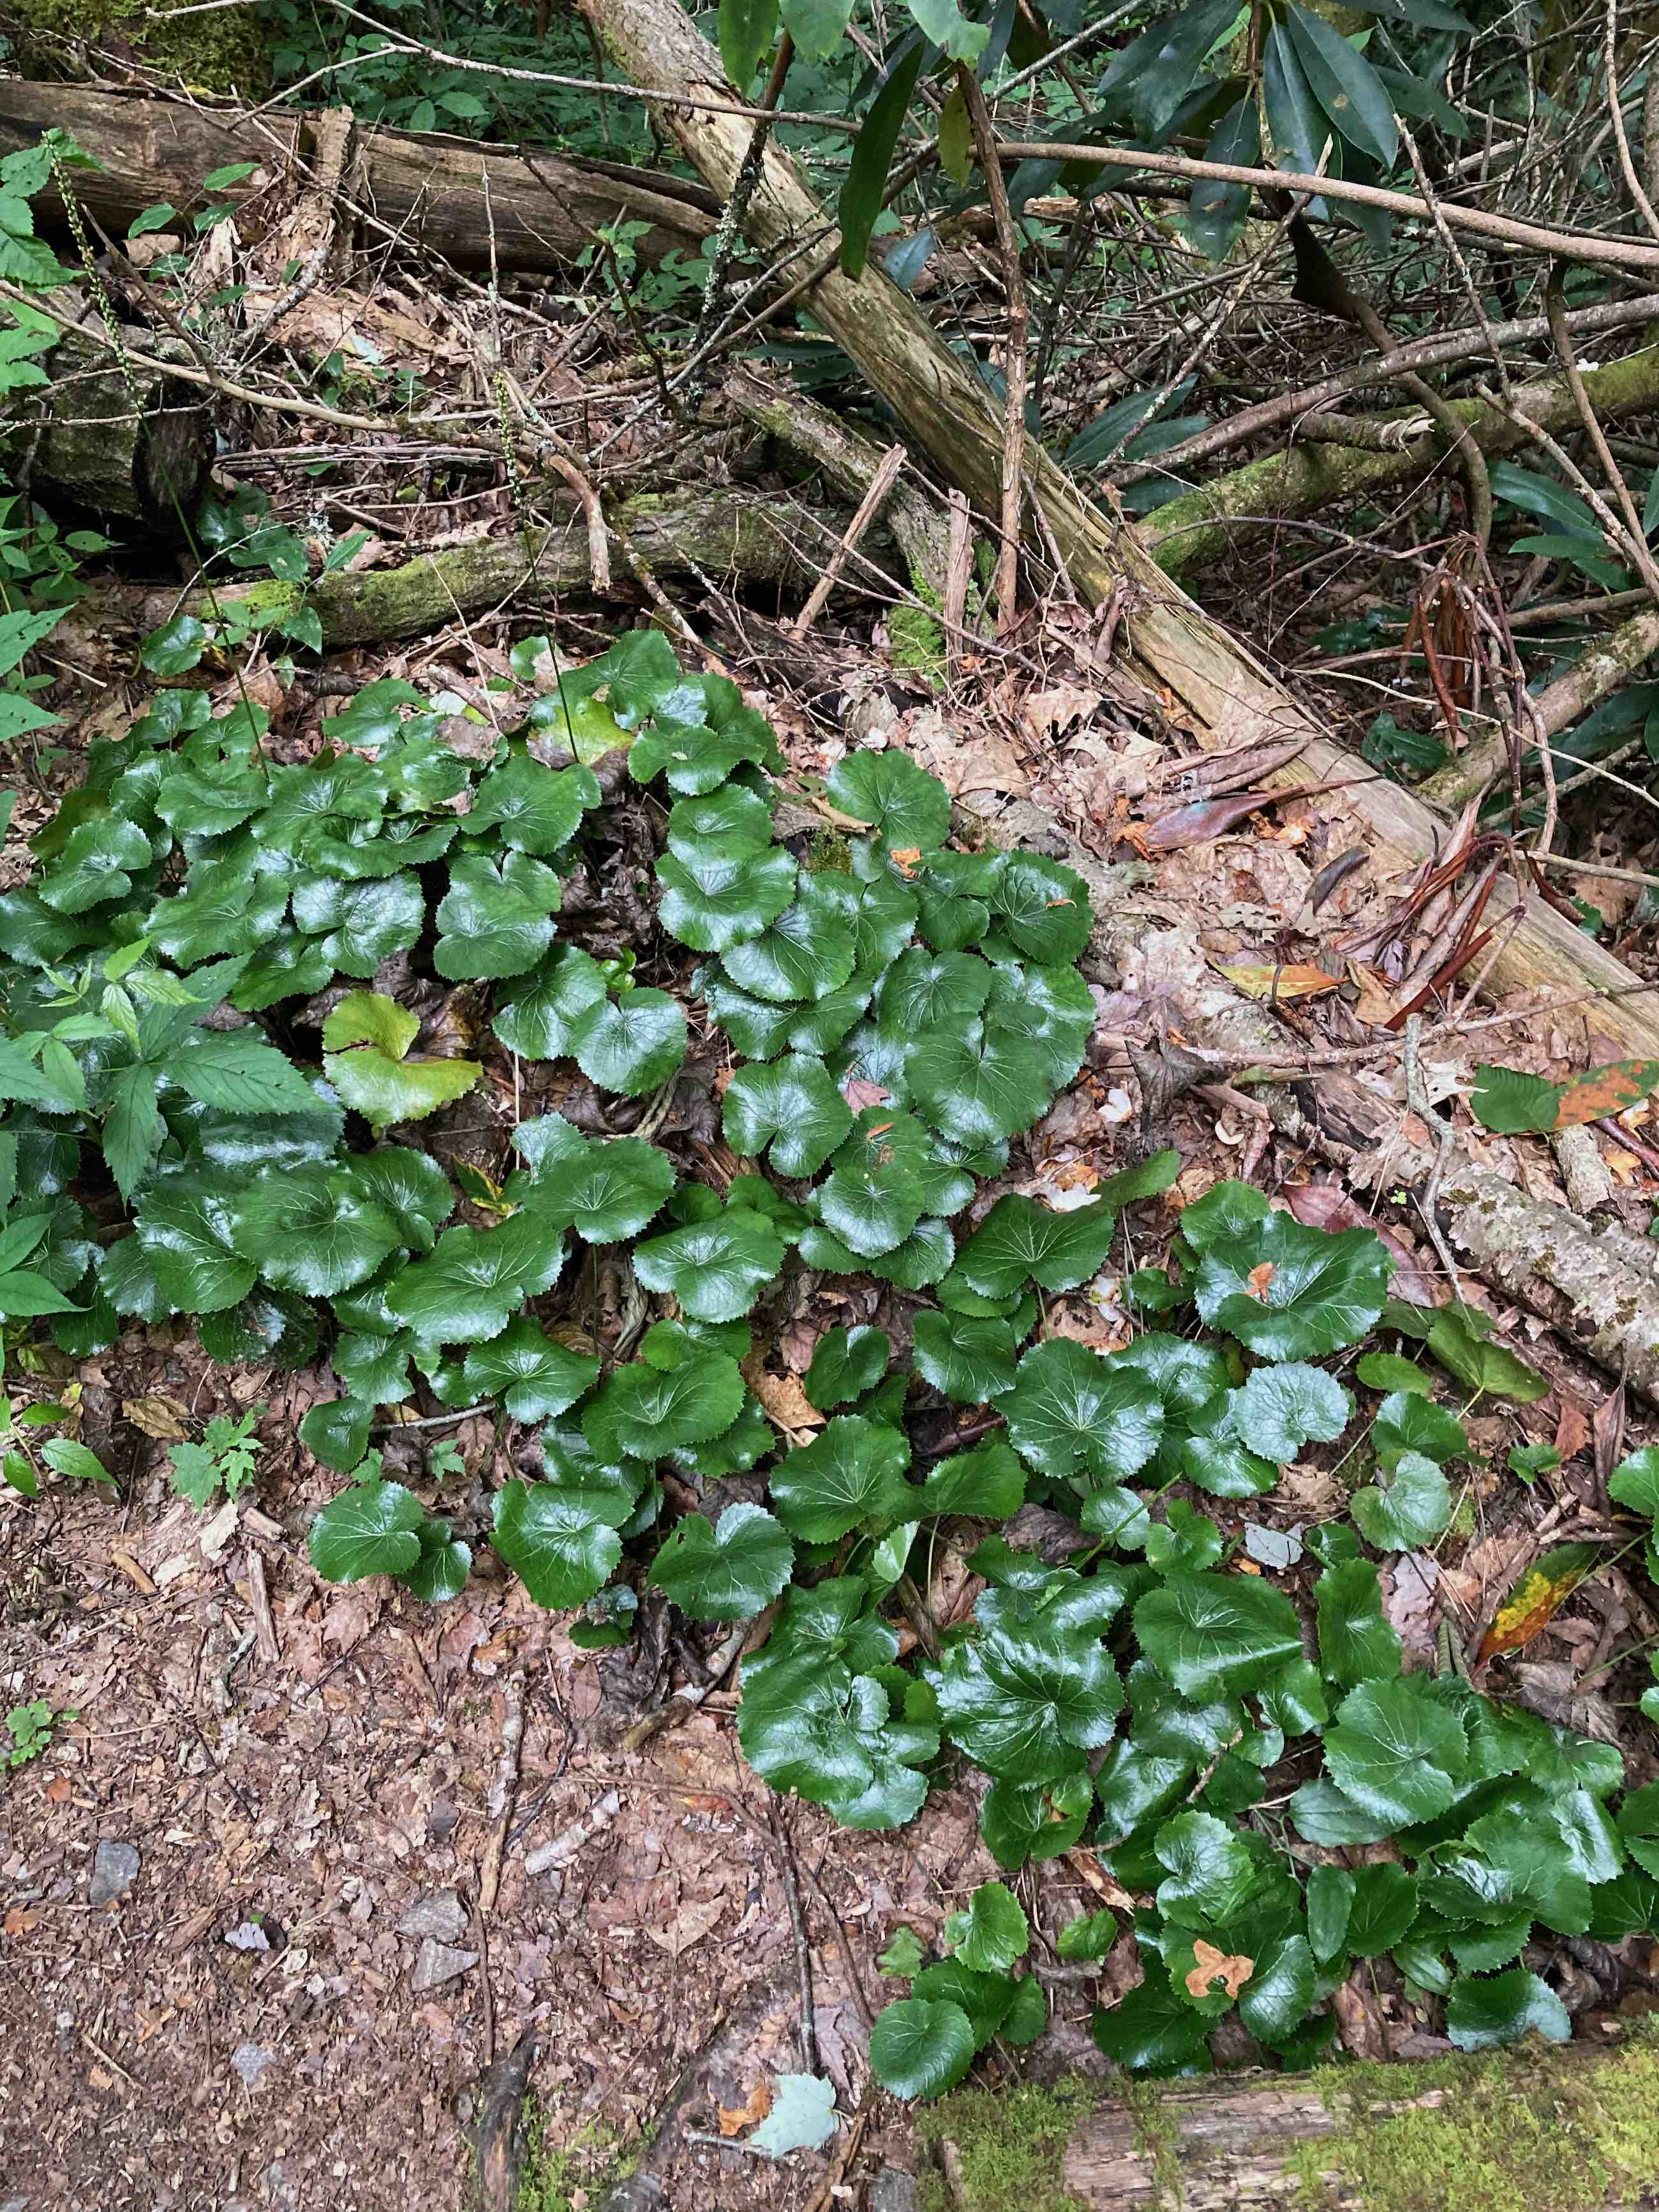 The Scientific Name is Galax urceolata [= Galax aphylla]. You will likely hear them called Galax, Beetleweed. This picture shows the Shiny, dark green, round, evergreen leaves. Found in dense patches as it is rhizomatous. of Galax urceolata [= Galax aphylla]